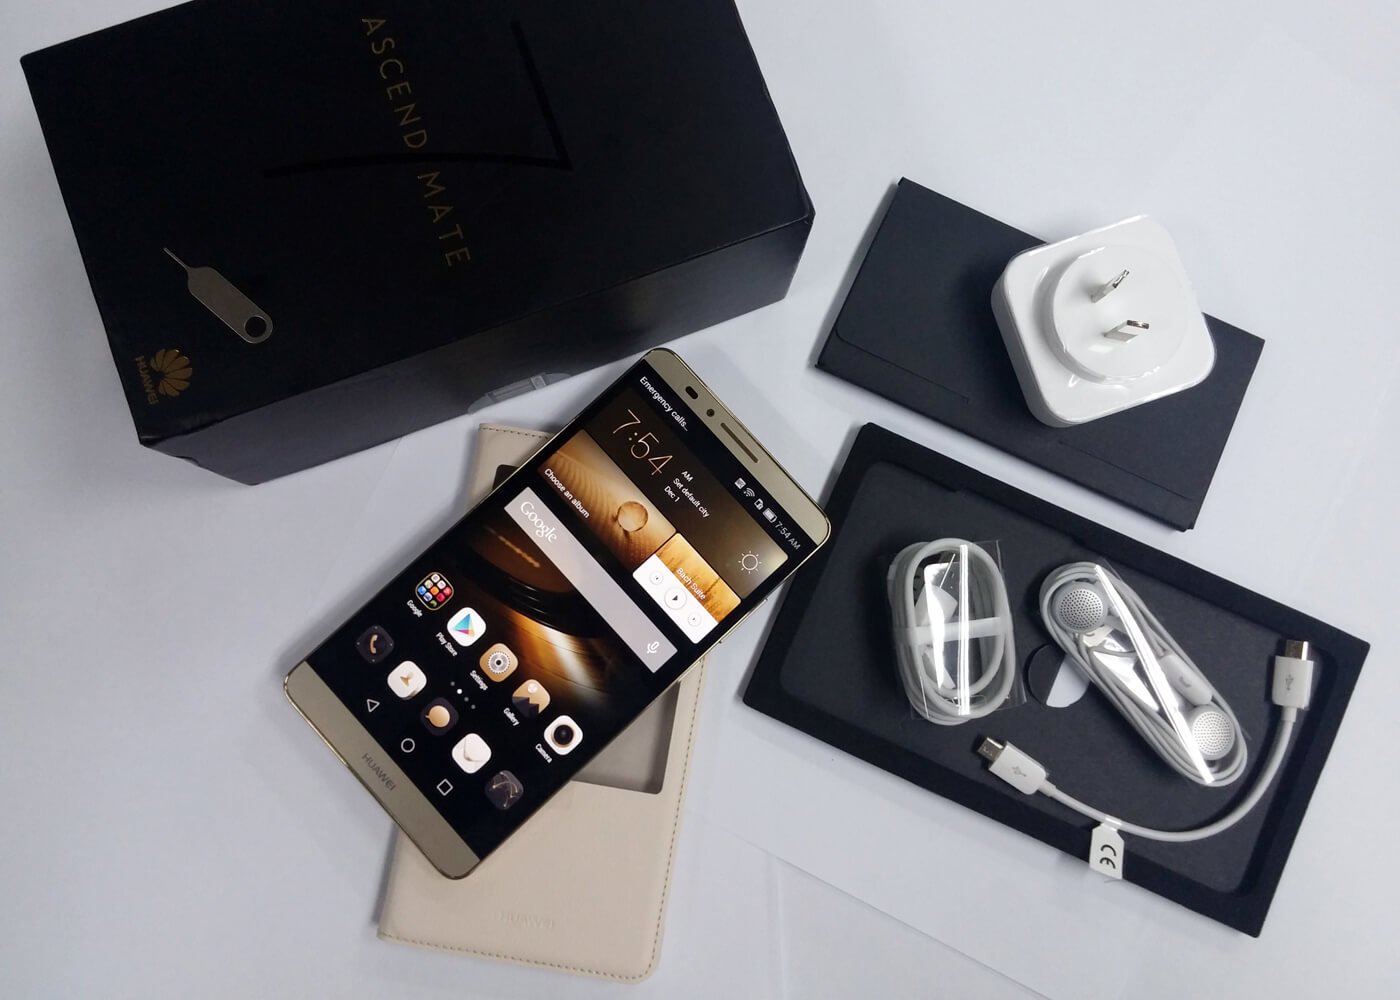 Unboxing Huawei Ascend Mate7